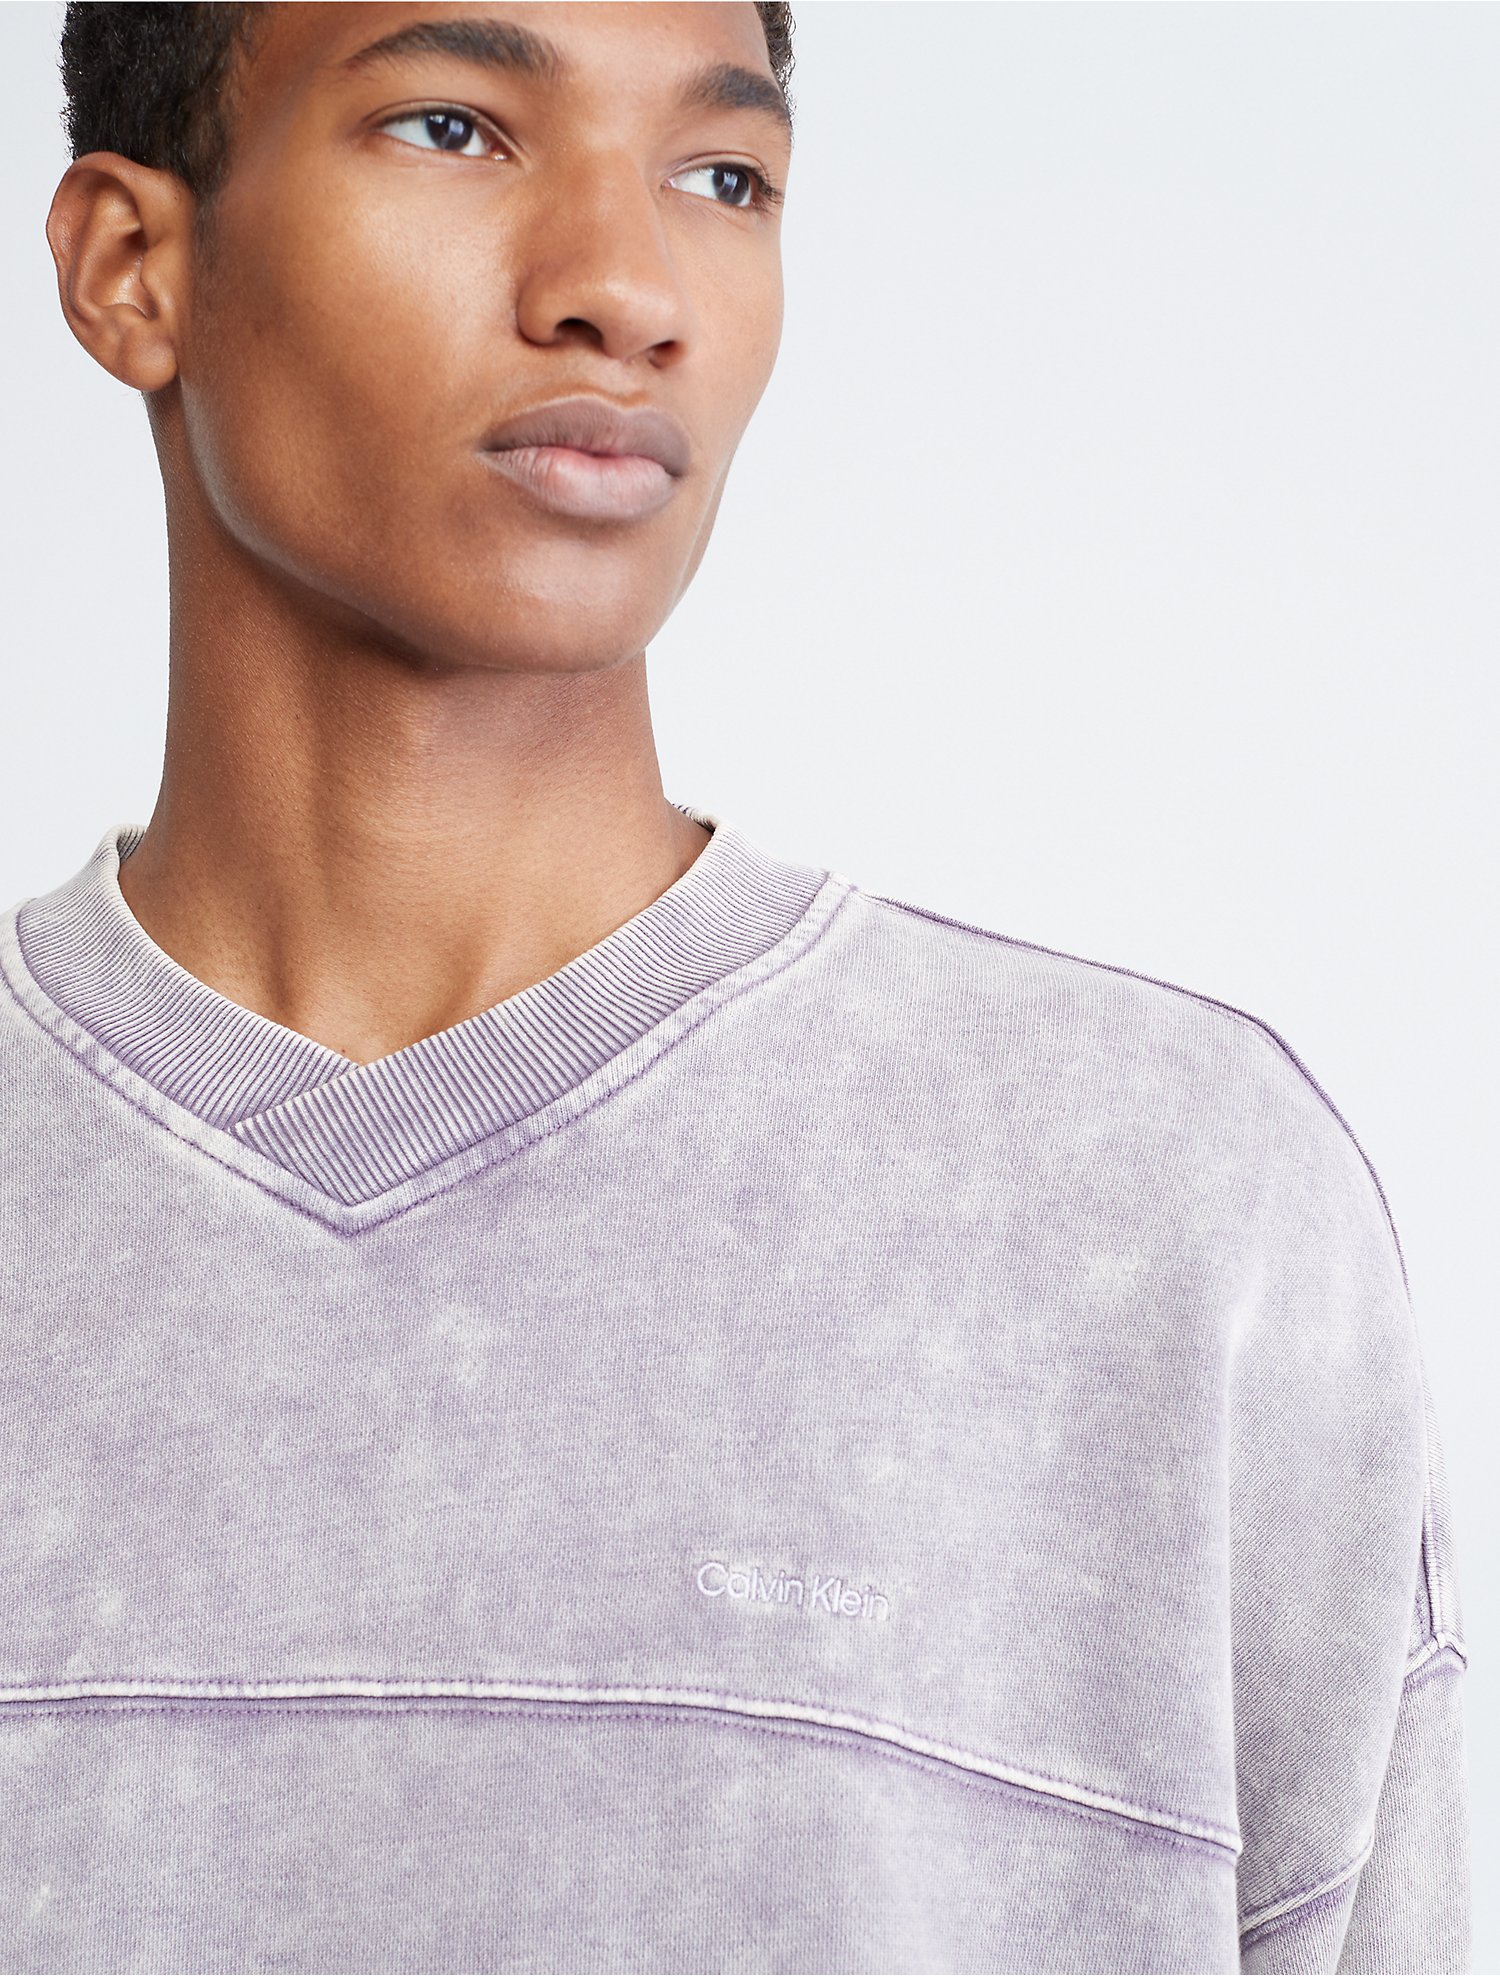 Toegepast God IJver Color Relaxed Fit Overdyed Canvas Terry Sweatshirt | Calvin Klein